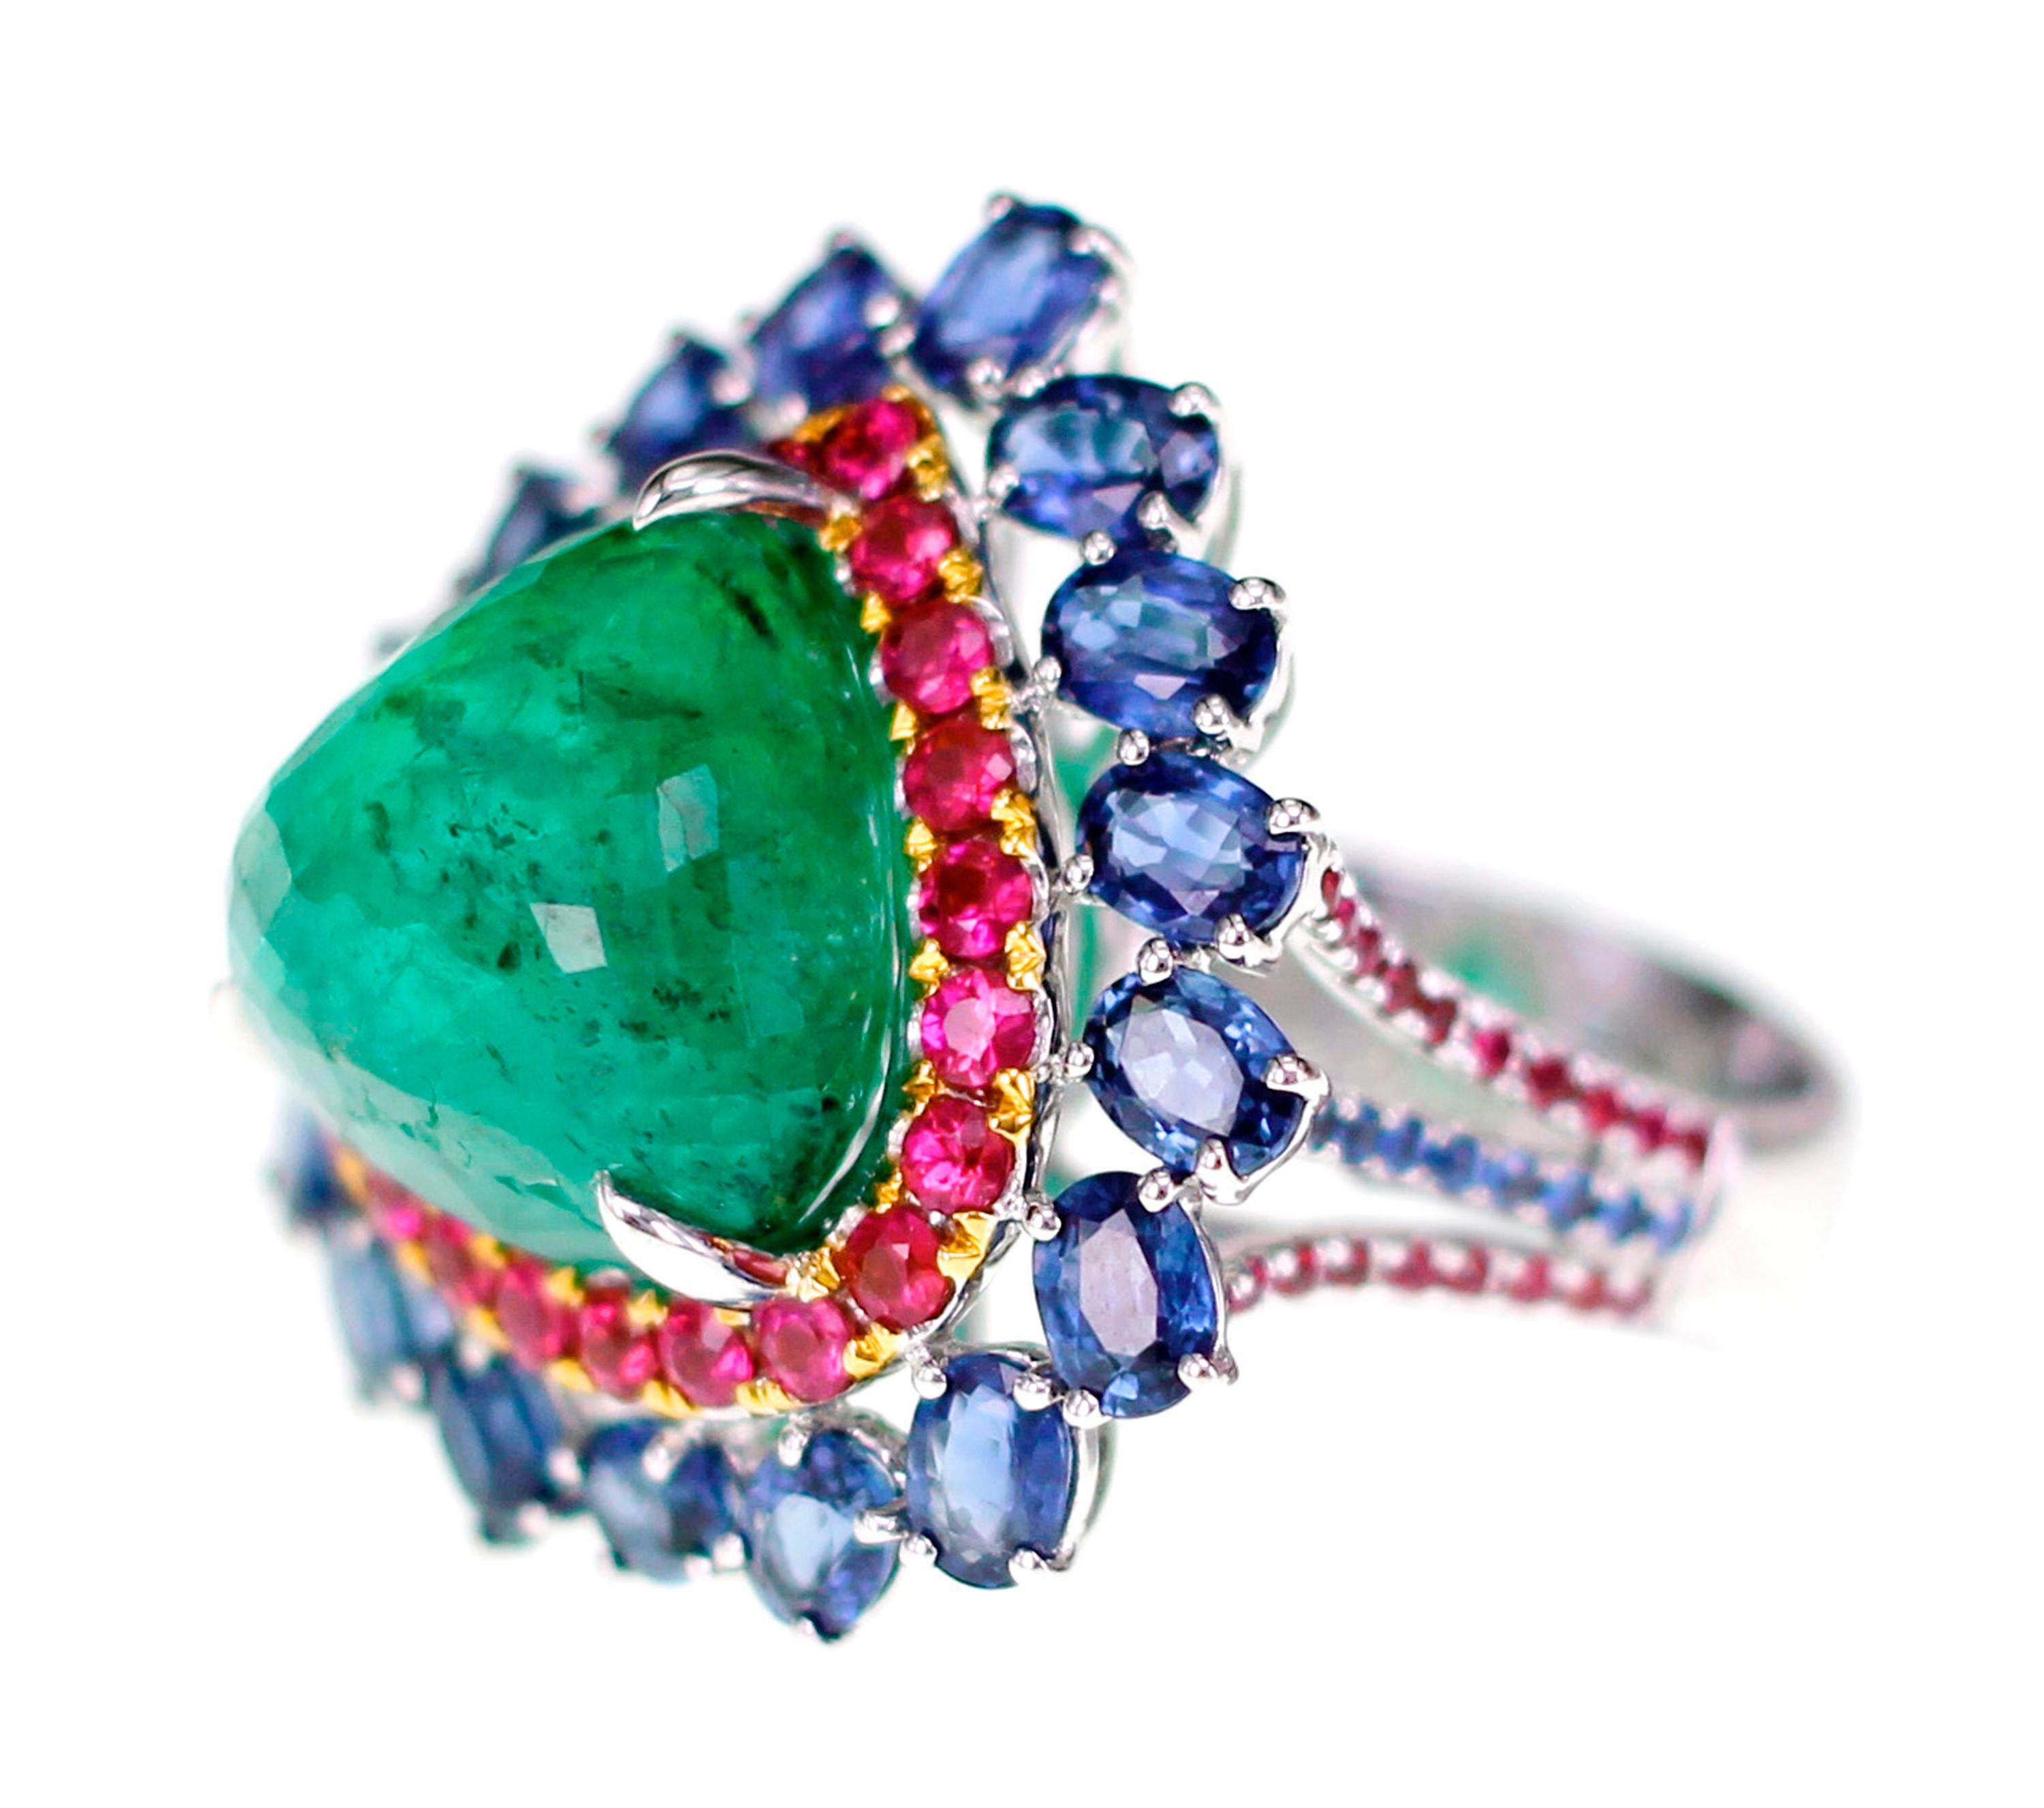 Continuing from our RGB Collection, the ring echoes nostalgia from all angles. 10.65 carat of Zambian Emerald is set with 1 carat of Mozambique ruby and 3.74 carat of Sri Lankan Sapphire. Ring size is US 6.25